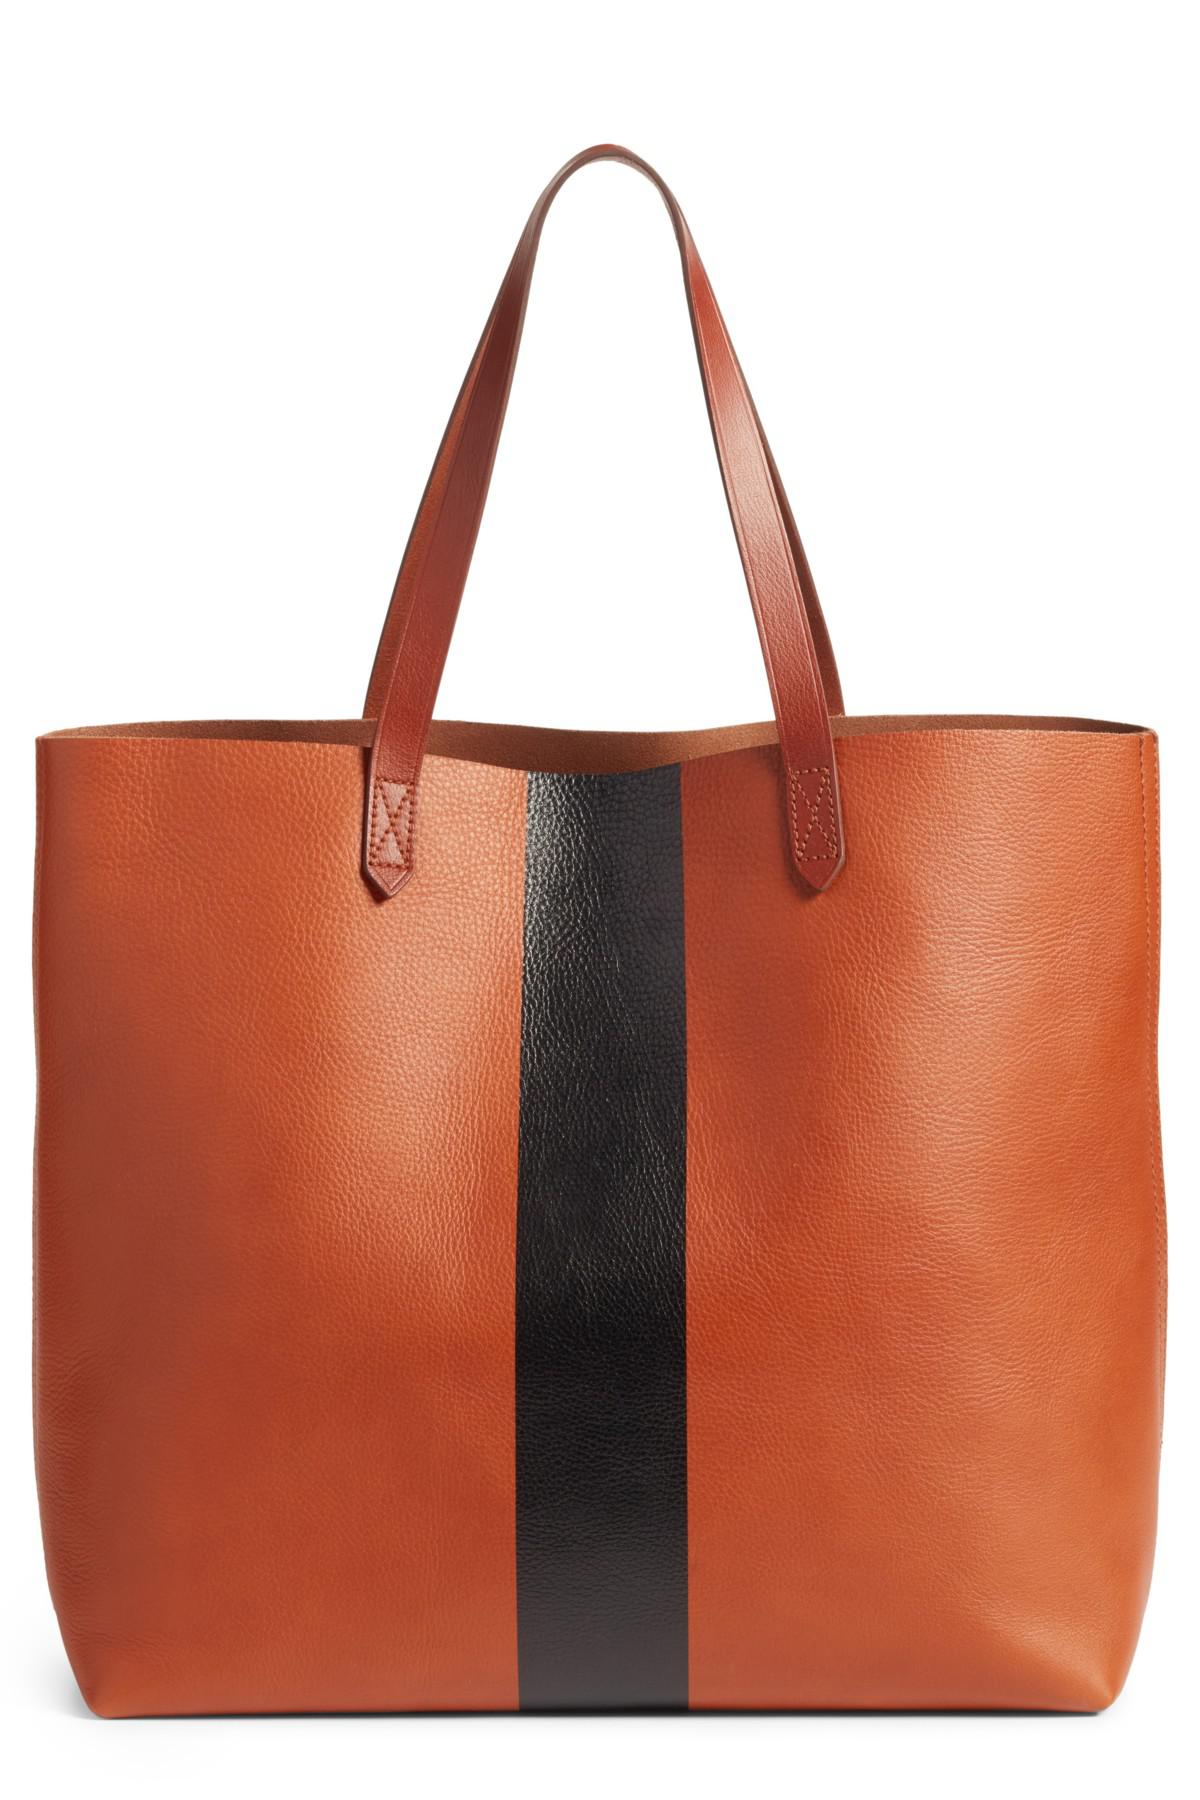 Madewell Paint Stripe Transport Leather Tote in Brown | Lyst